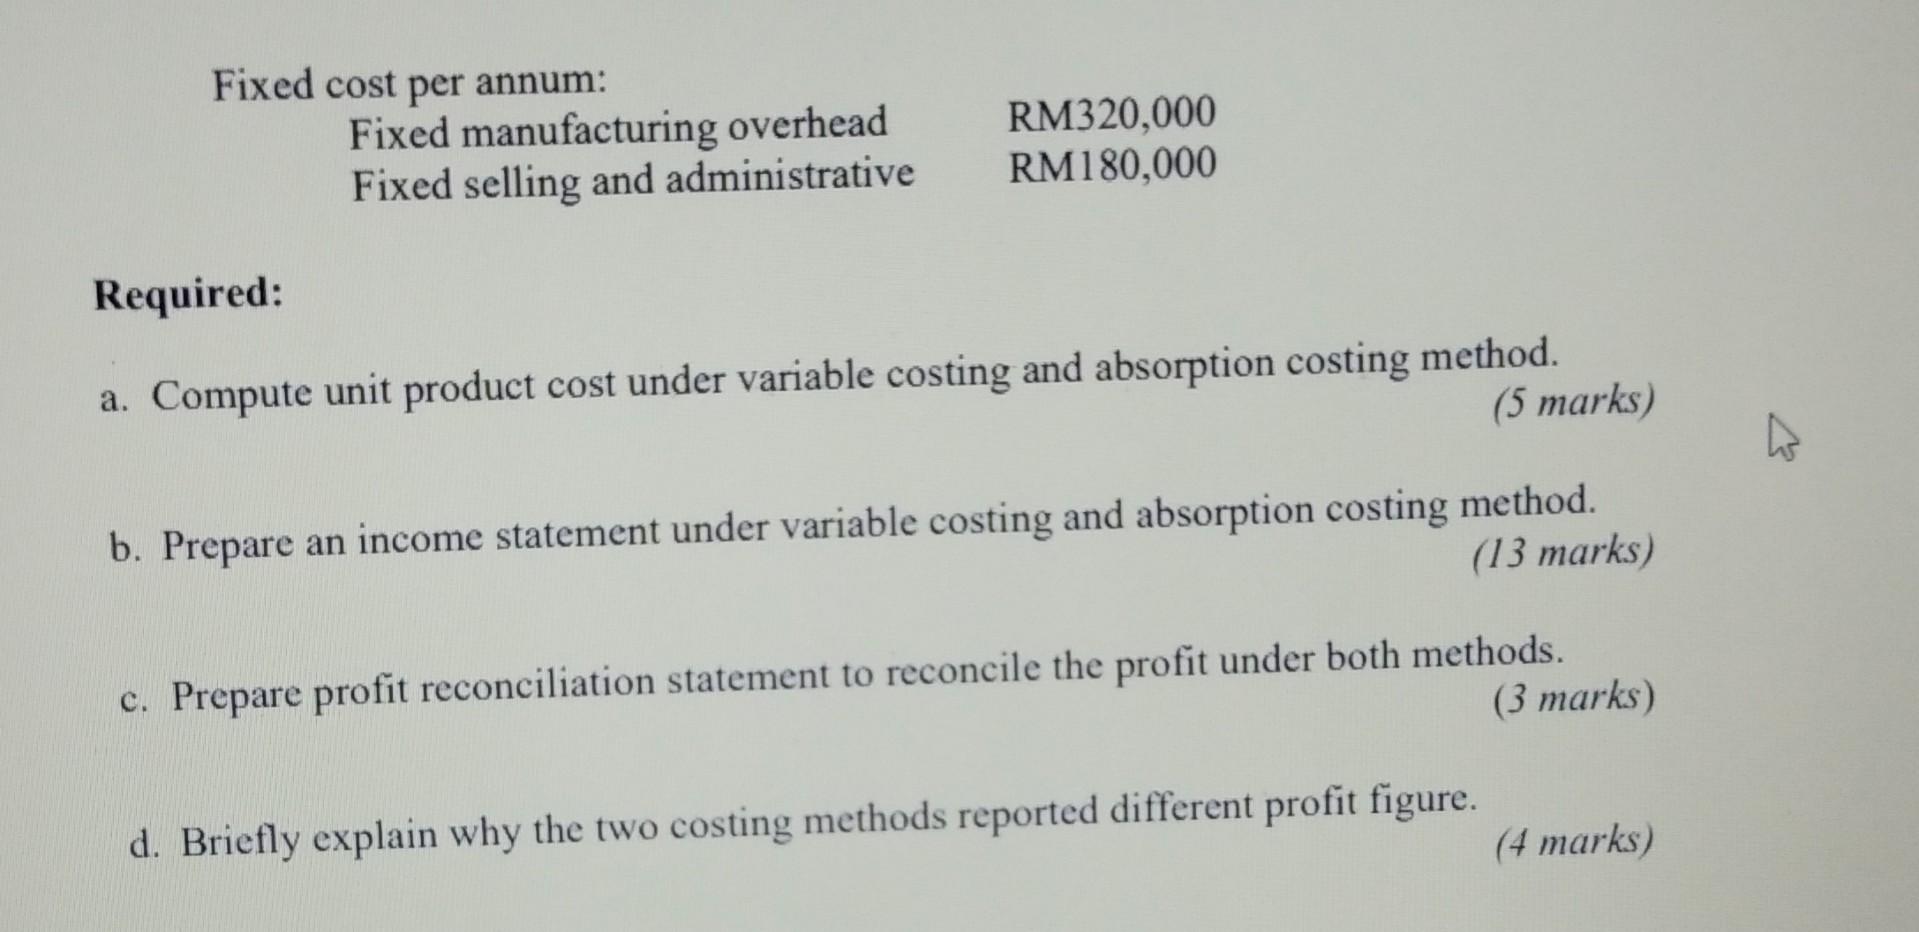 Fixed cost per annum:Fixed manufacturing overheadFixed selling and administrativeRM320,000RM180,000Required:a. Compute